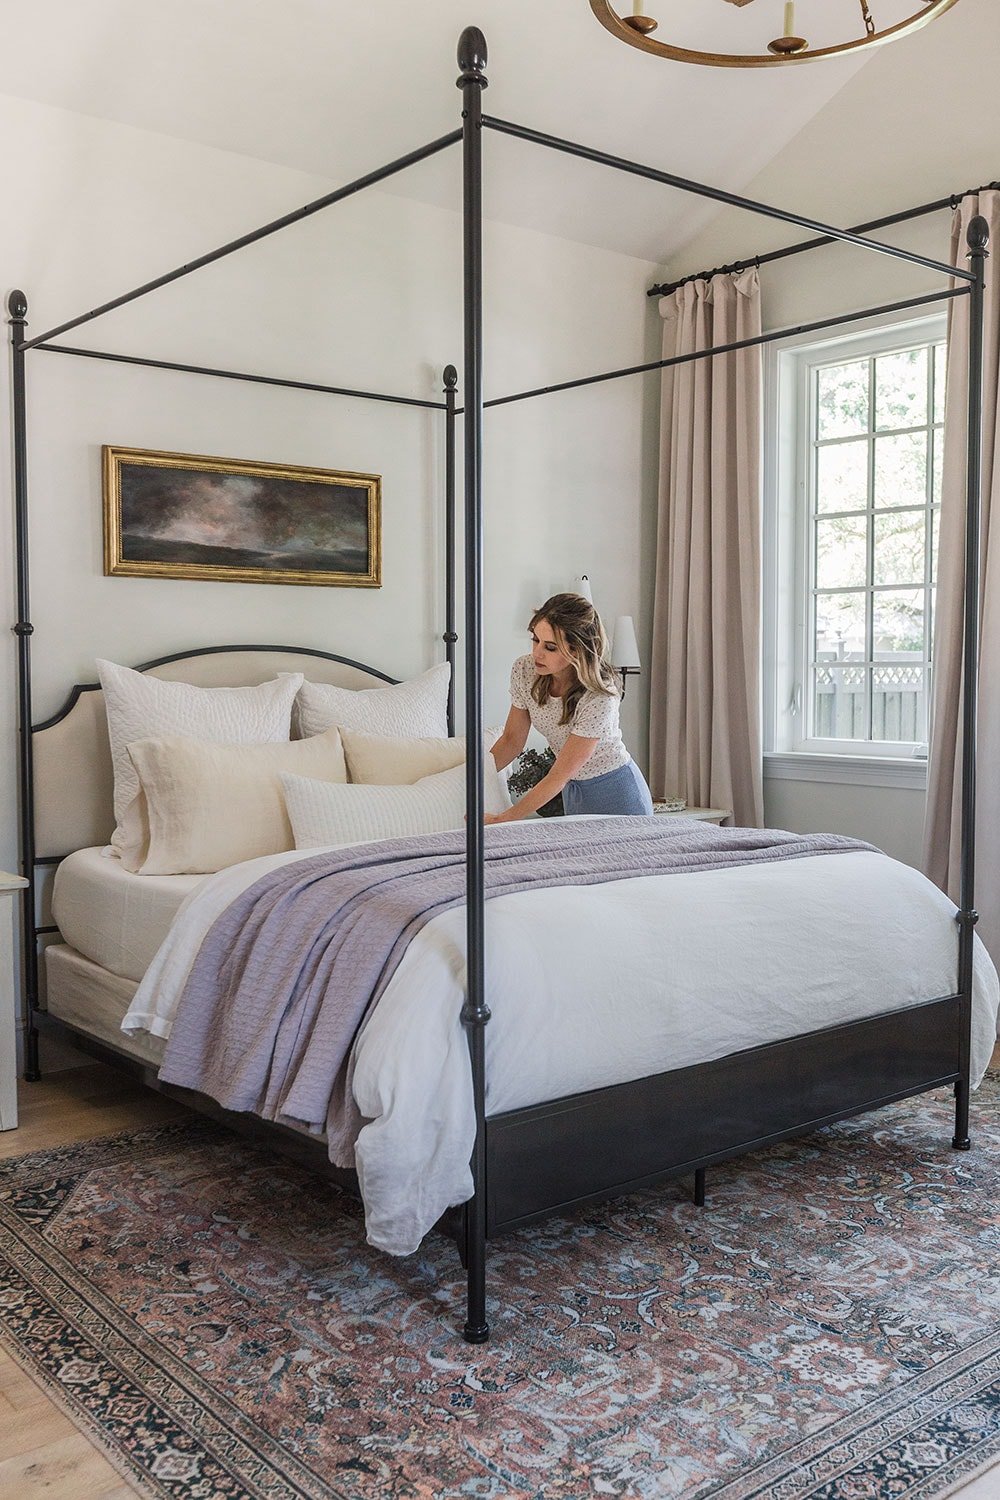 How to layer bedding like a pro - Jenna Sue Design